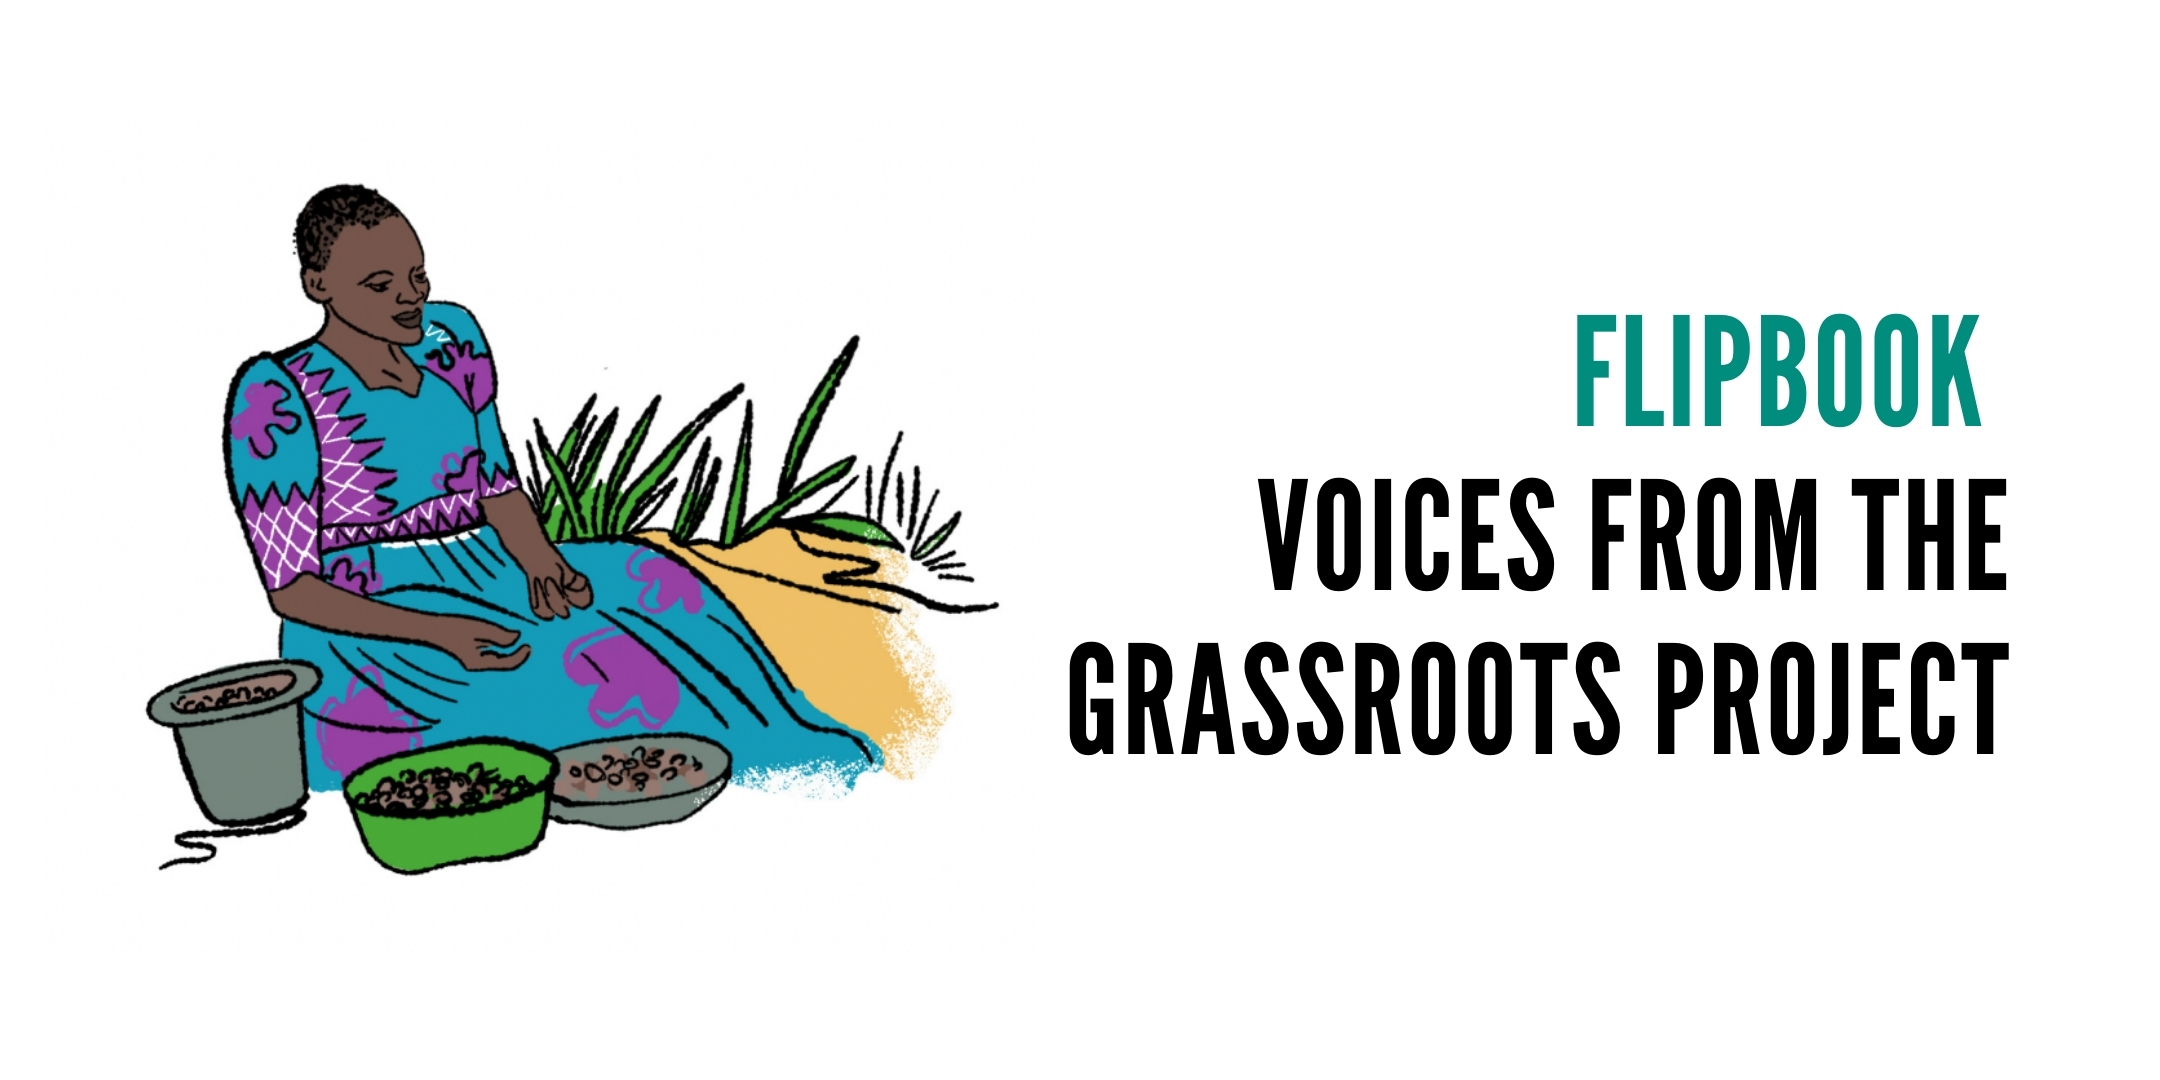 Flipbook - Voices from the Grassroots